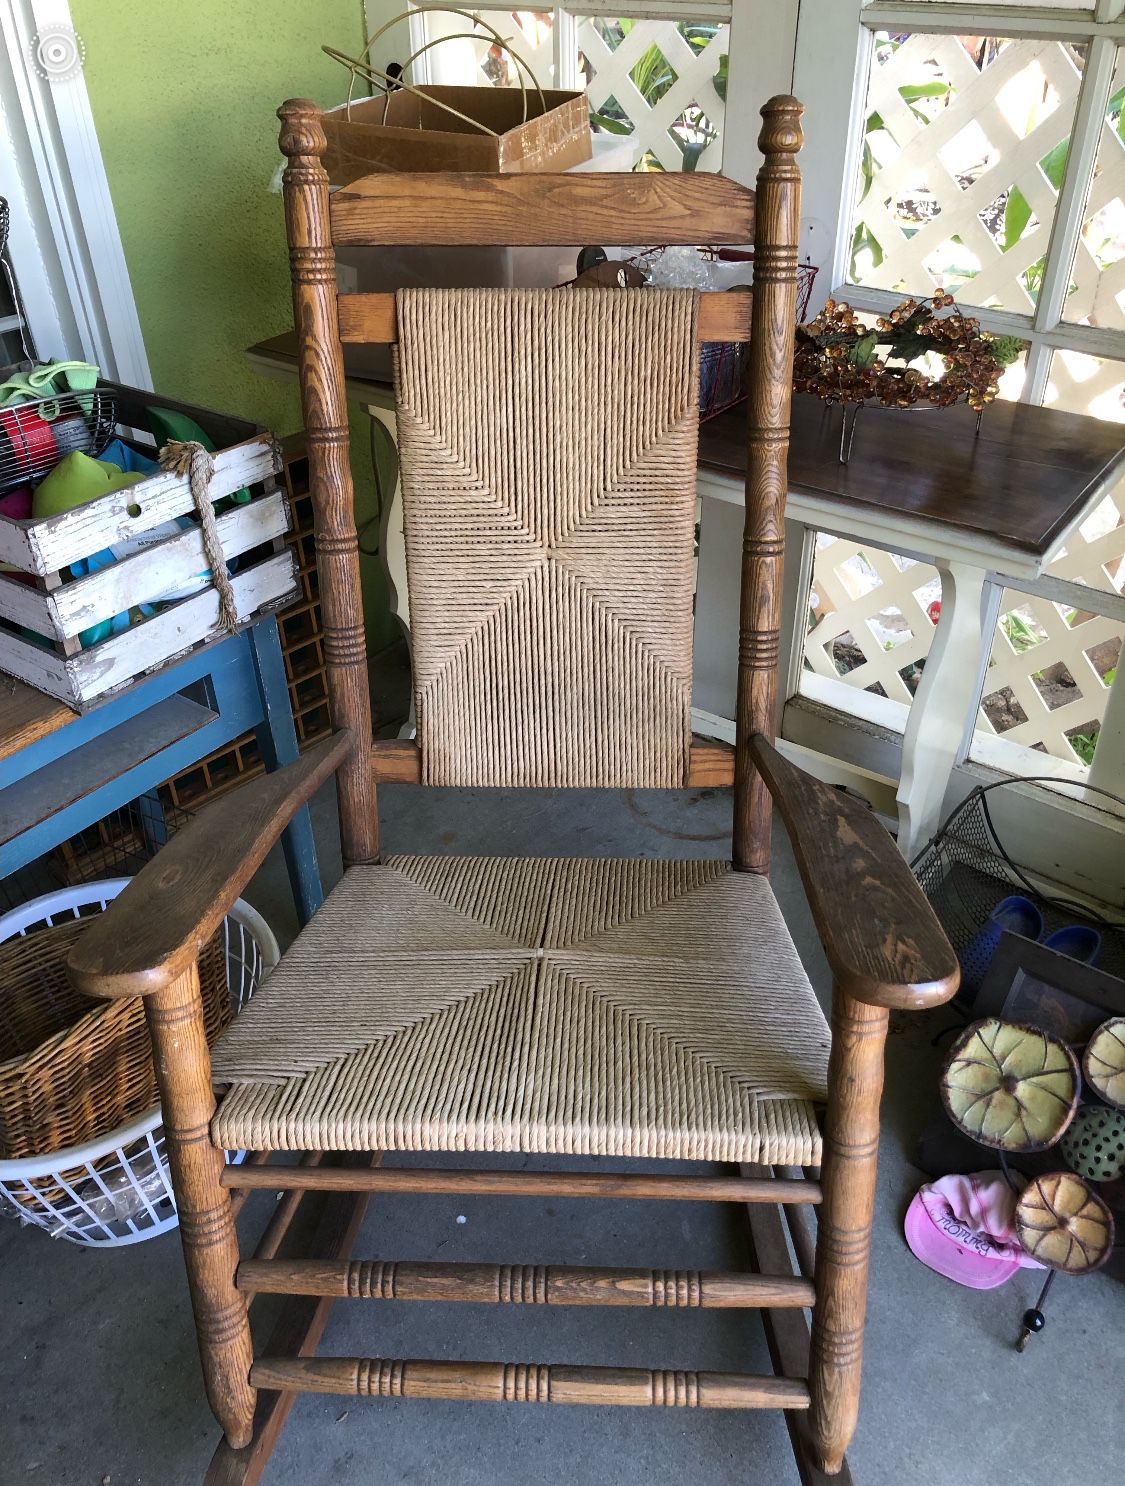 Large Wooden Rocking Chair